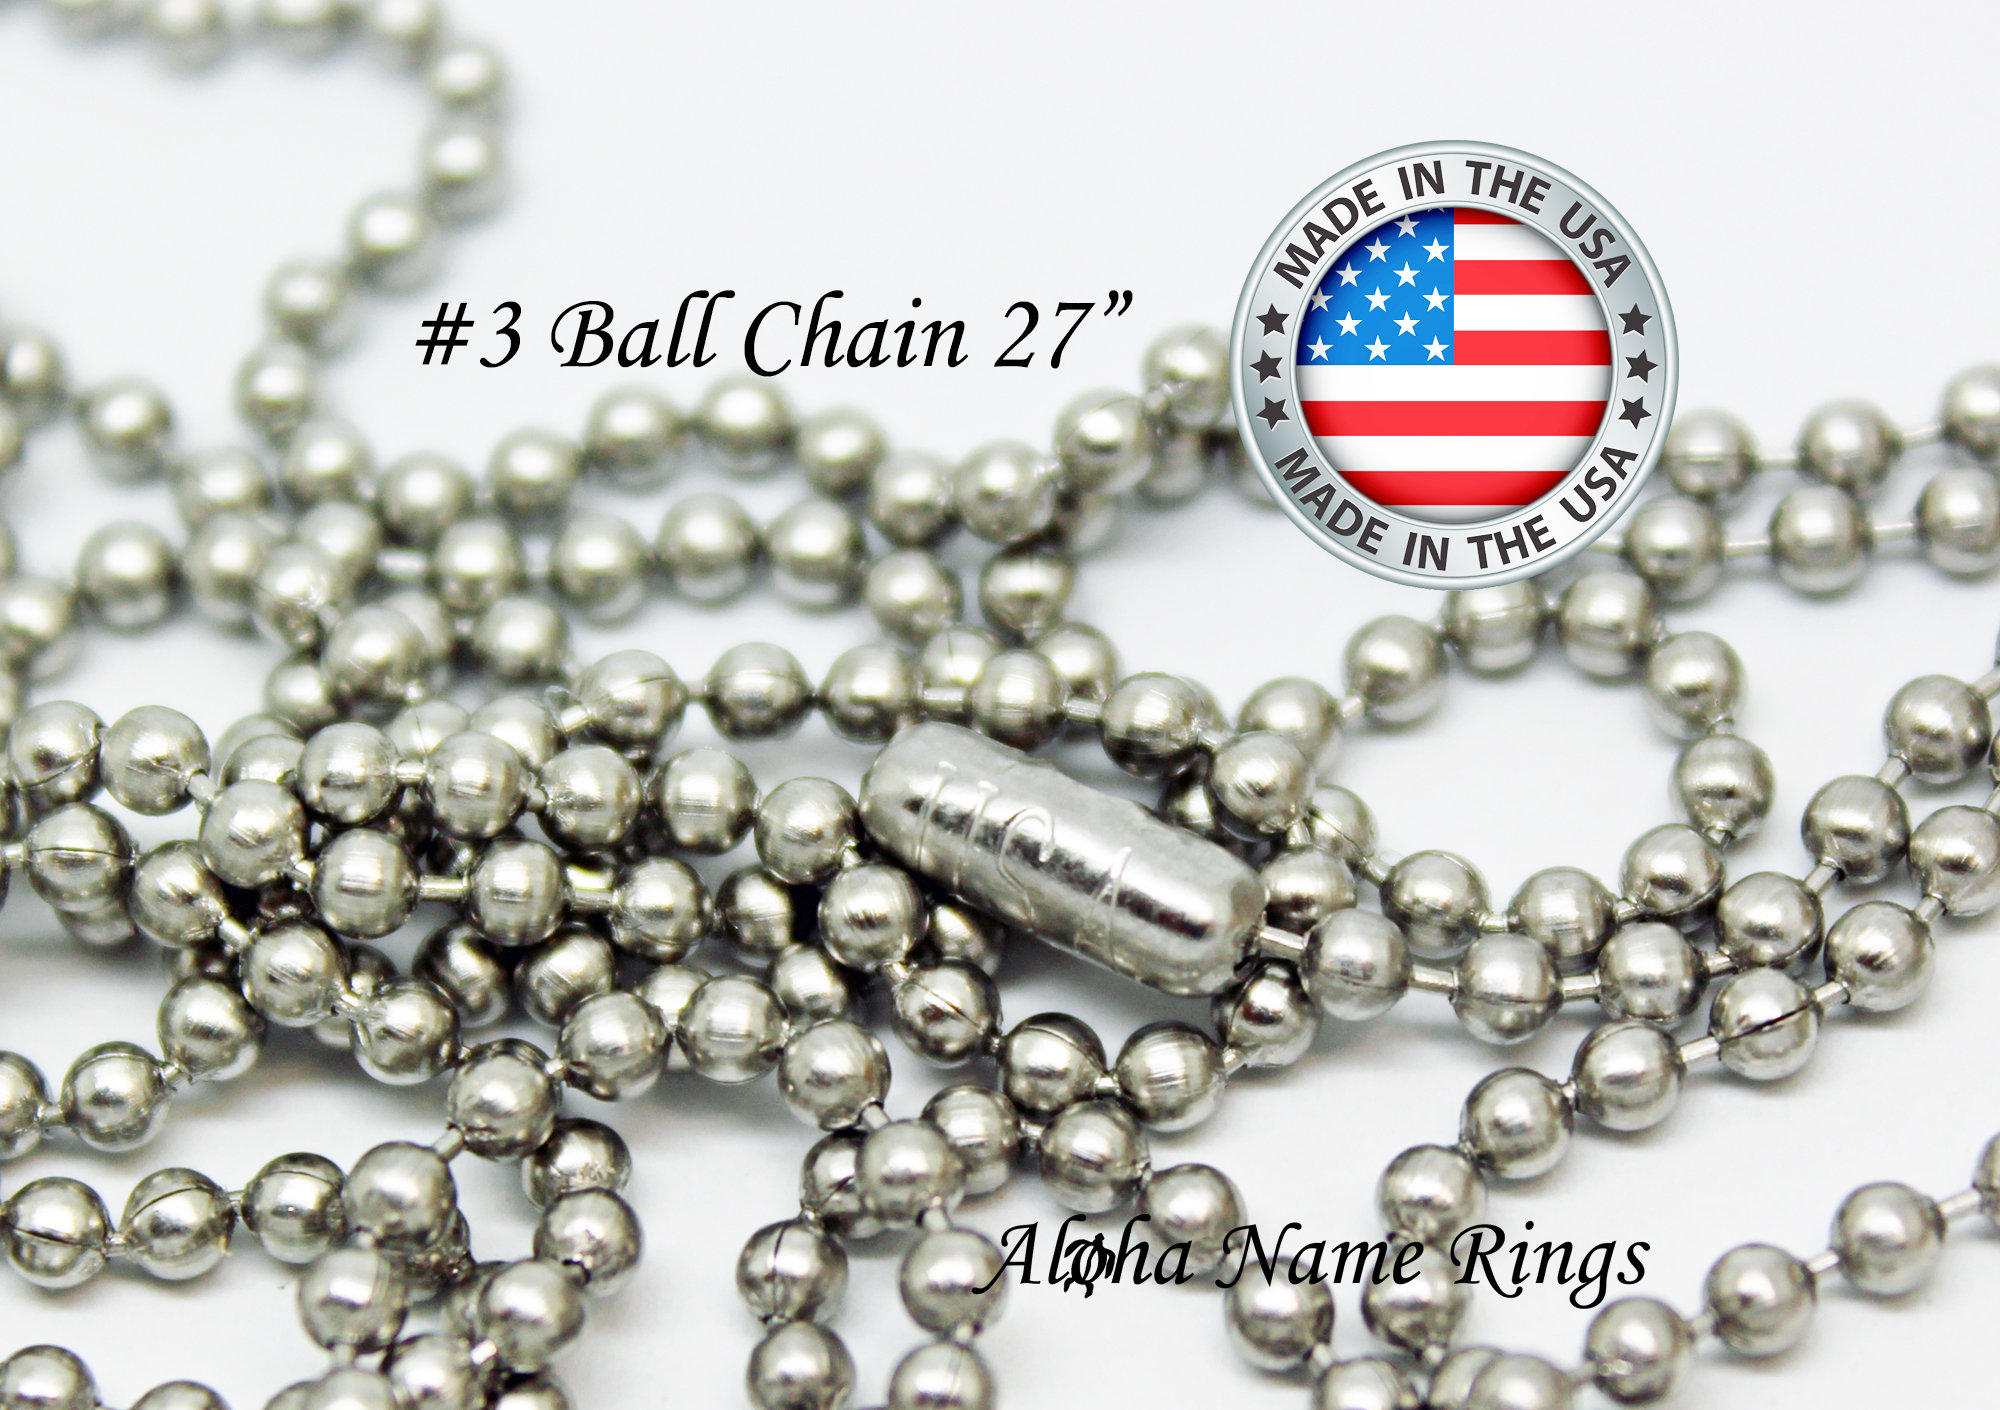 Mandala Crafts 24 Inch Stainless Steel Ball Chain Necklace Dog Chain  Necklace & Ball Bead Chain Connectors - 20 Dog Tag Chain Ball Chains for